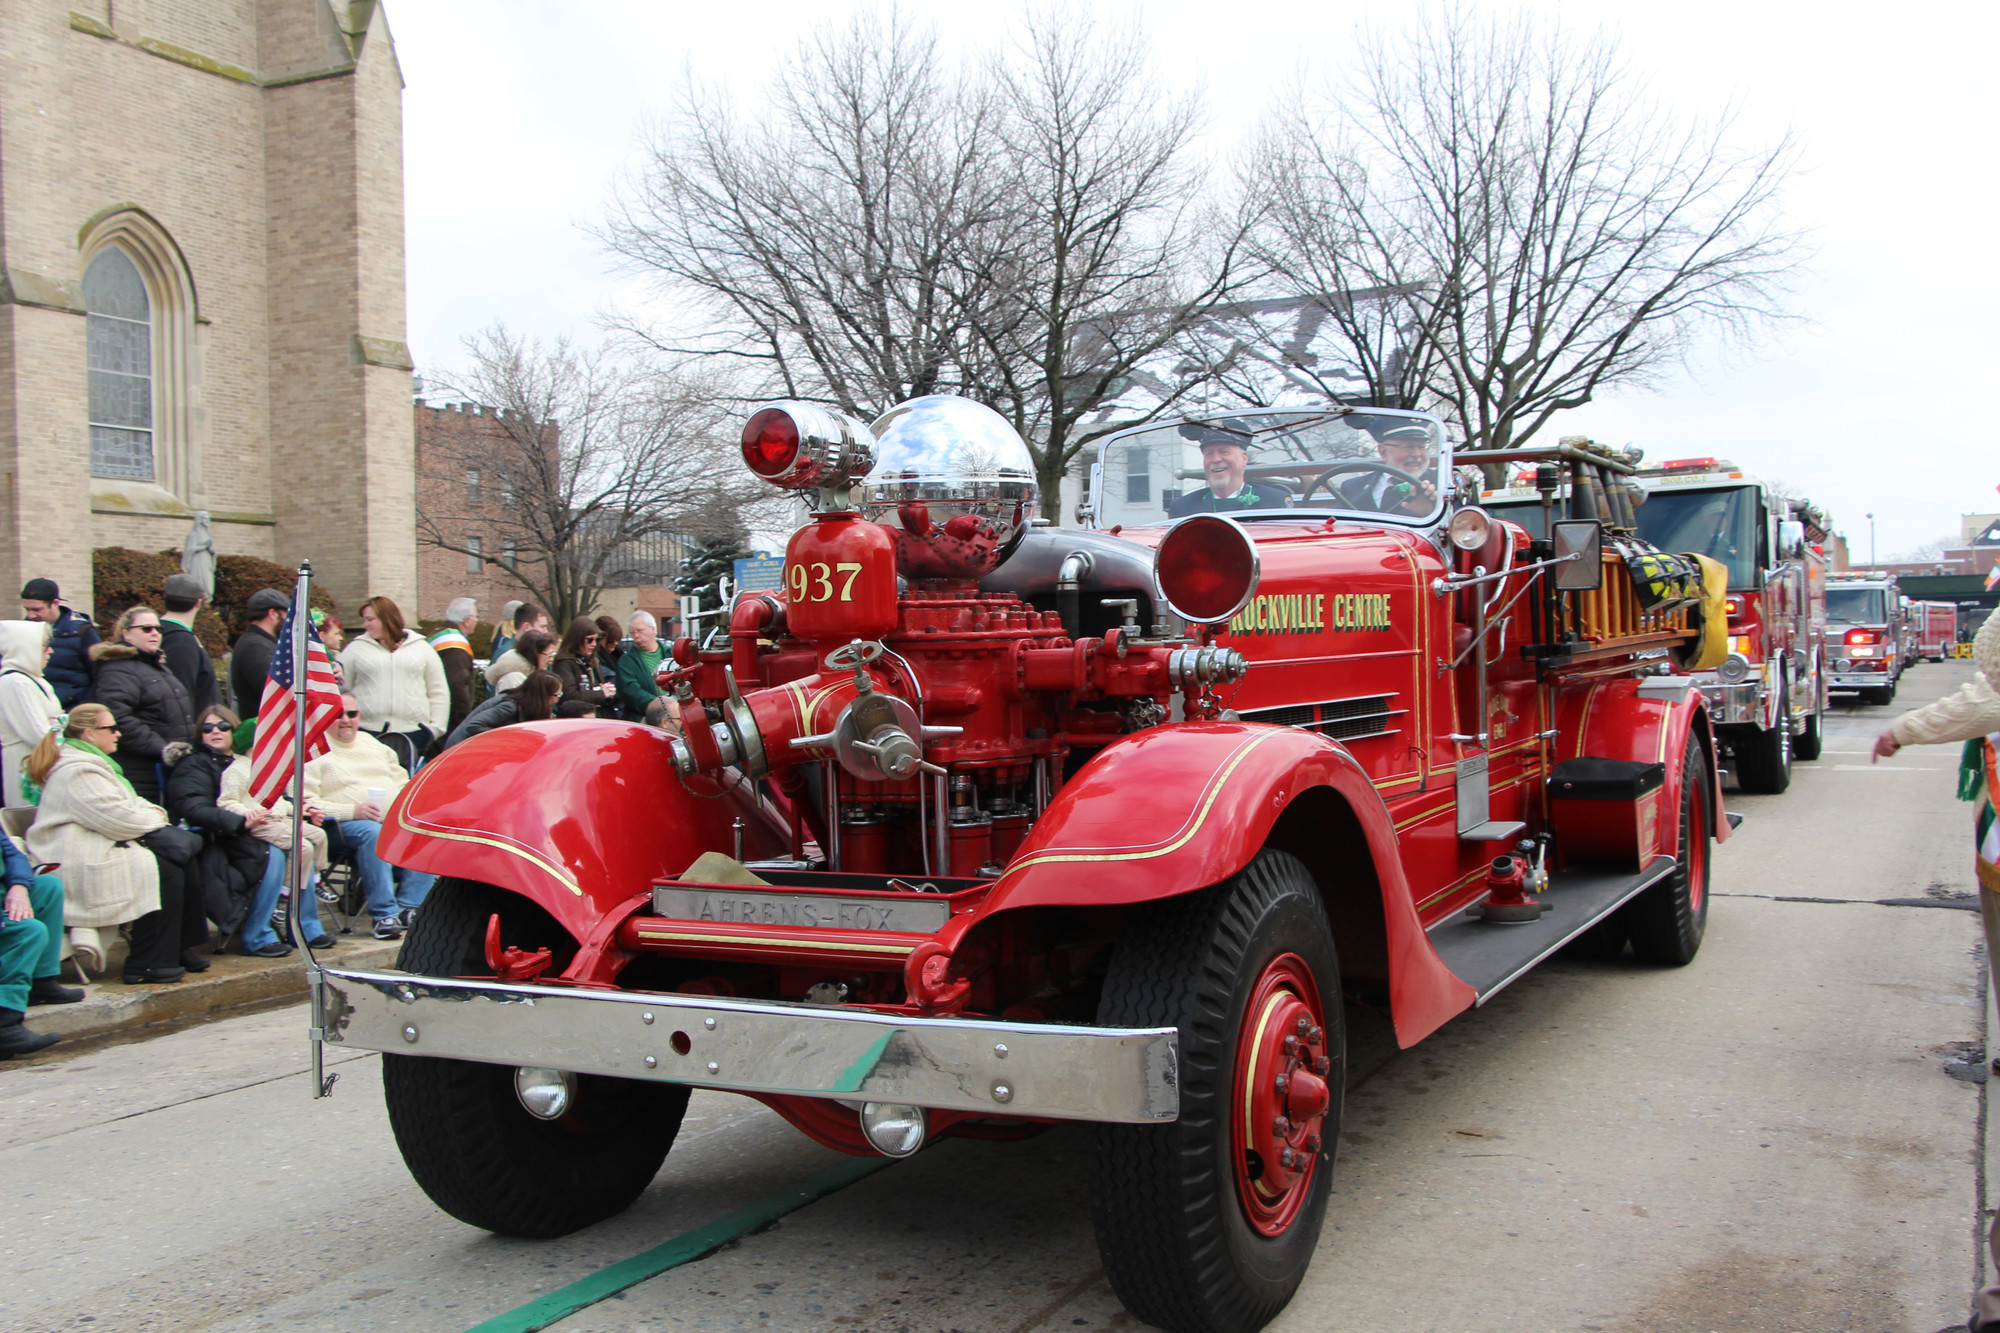 Members of The Rockville Centre Fire Department rode their trucks, including a classic, in the parade.